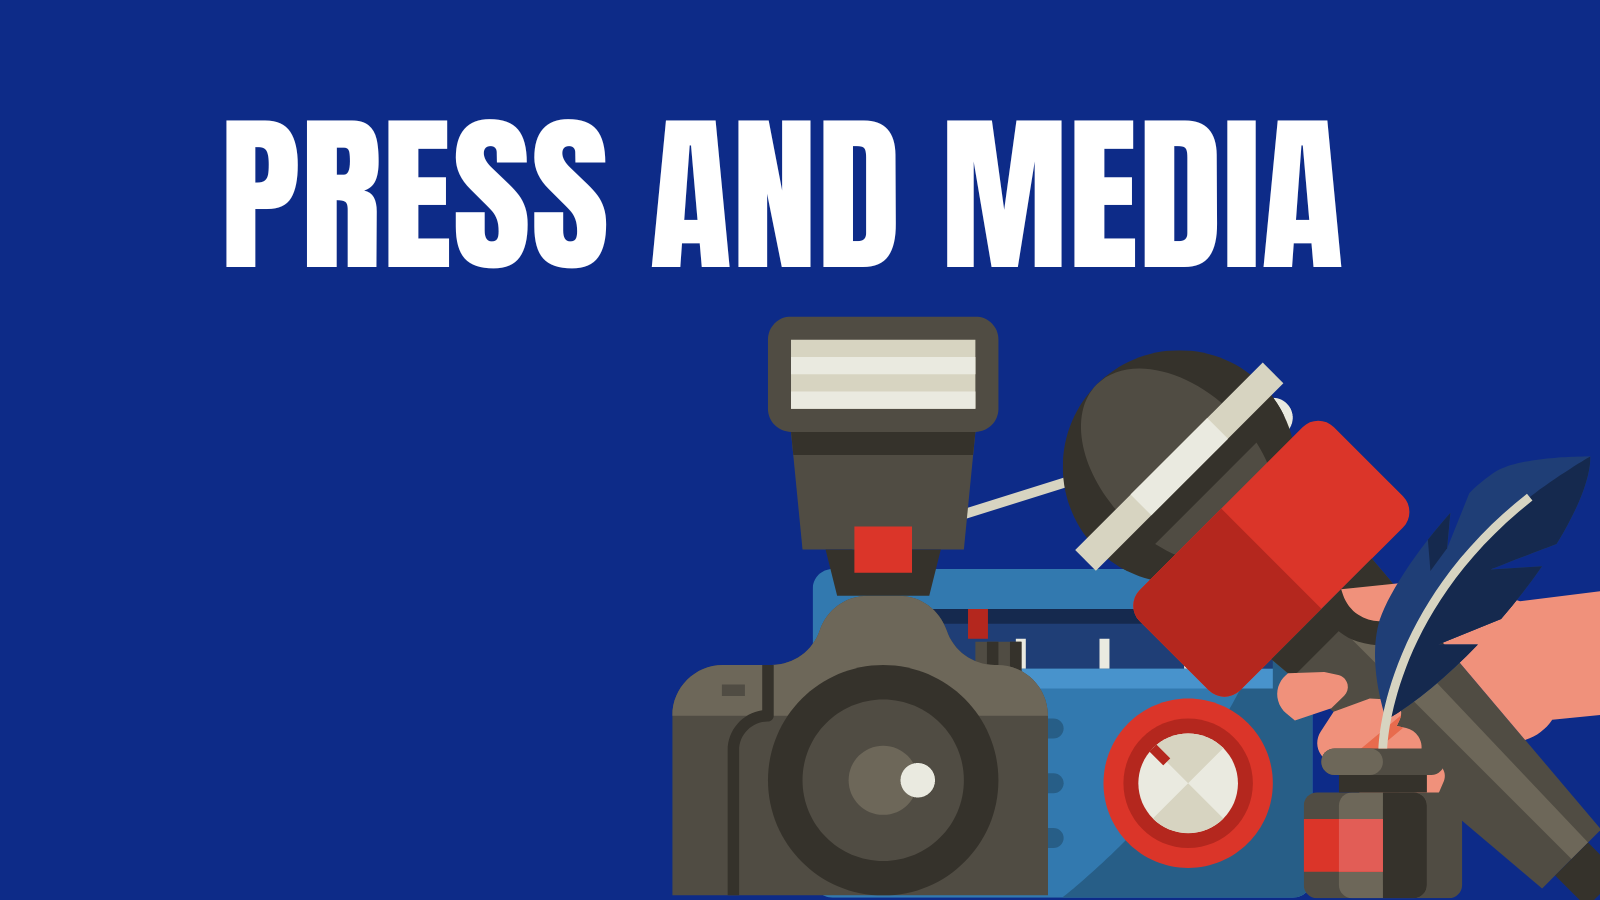 Graphic illustration featuring a camera and microphone, essential tools for press and media coverage